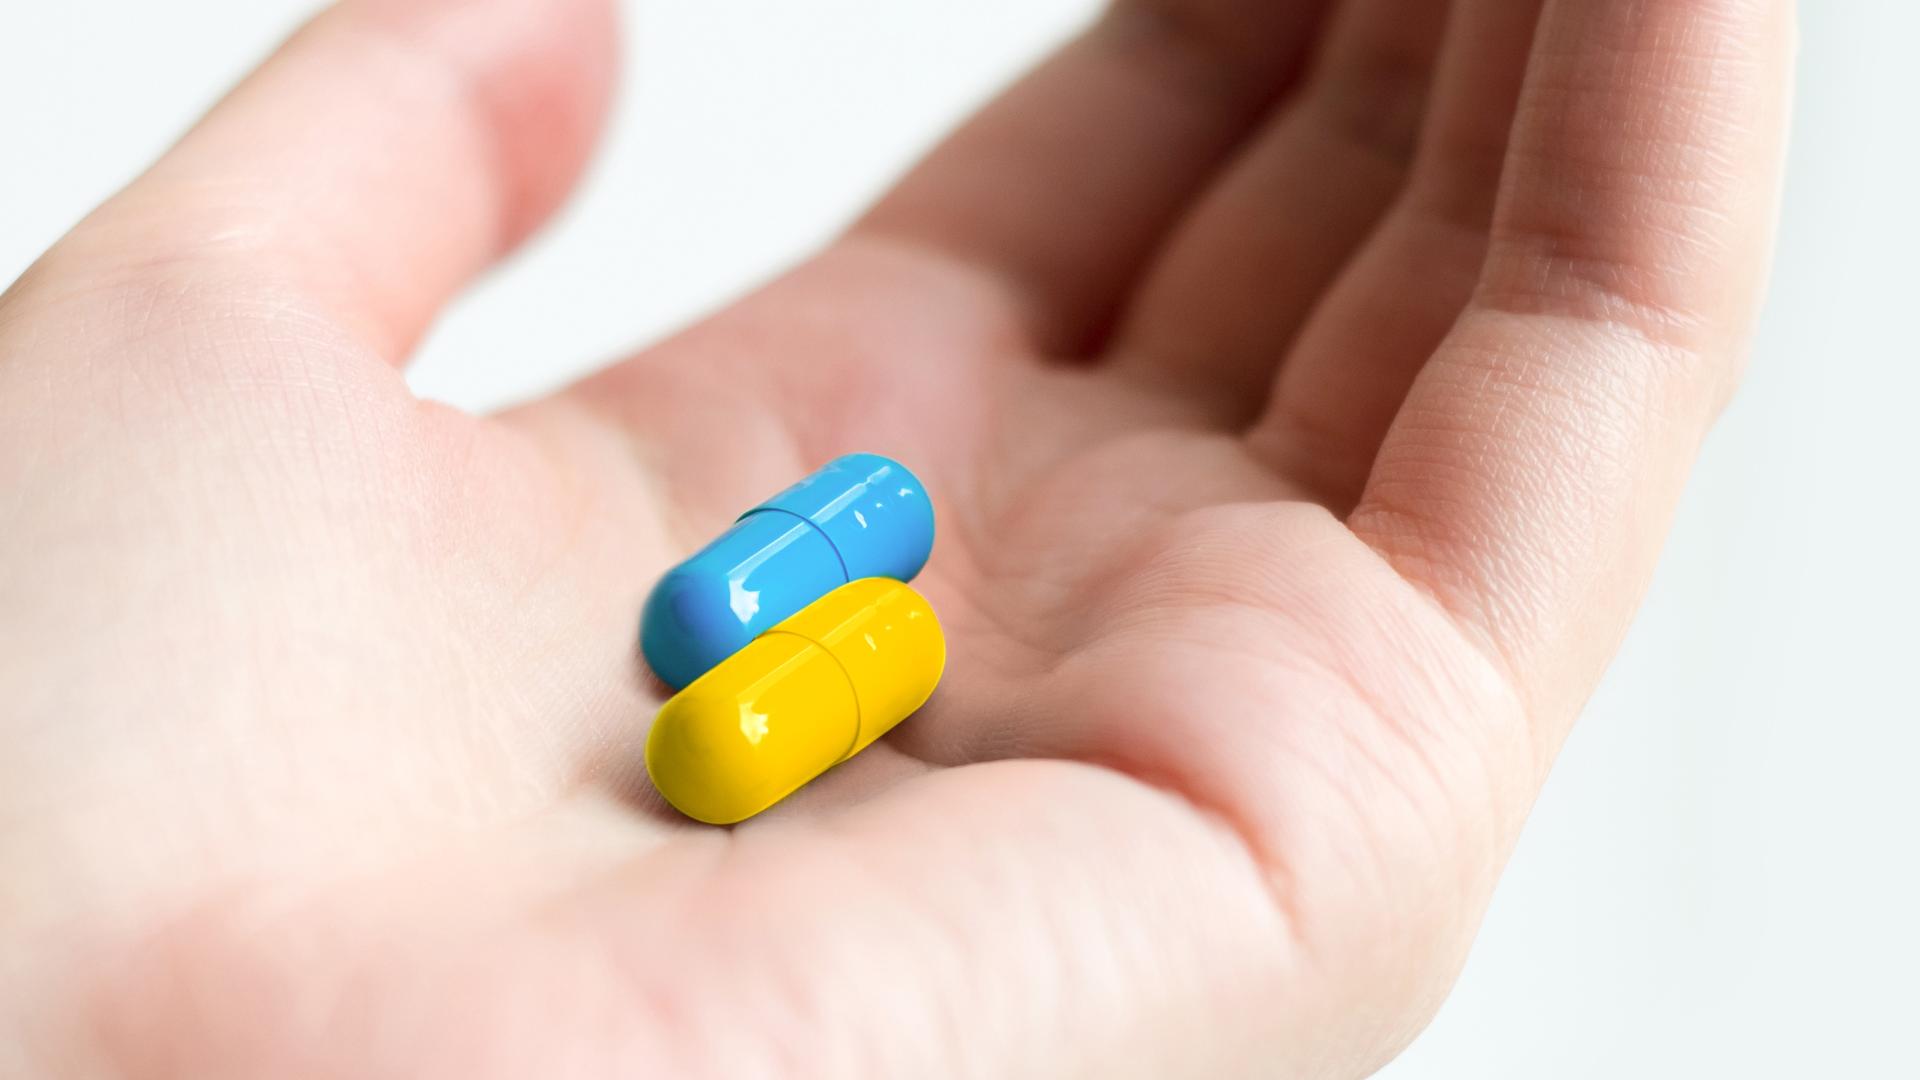 Pills in the colors of the Ukrainian flag